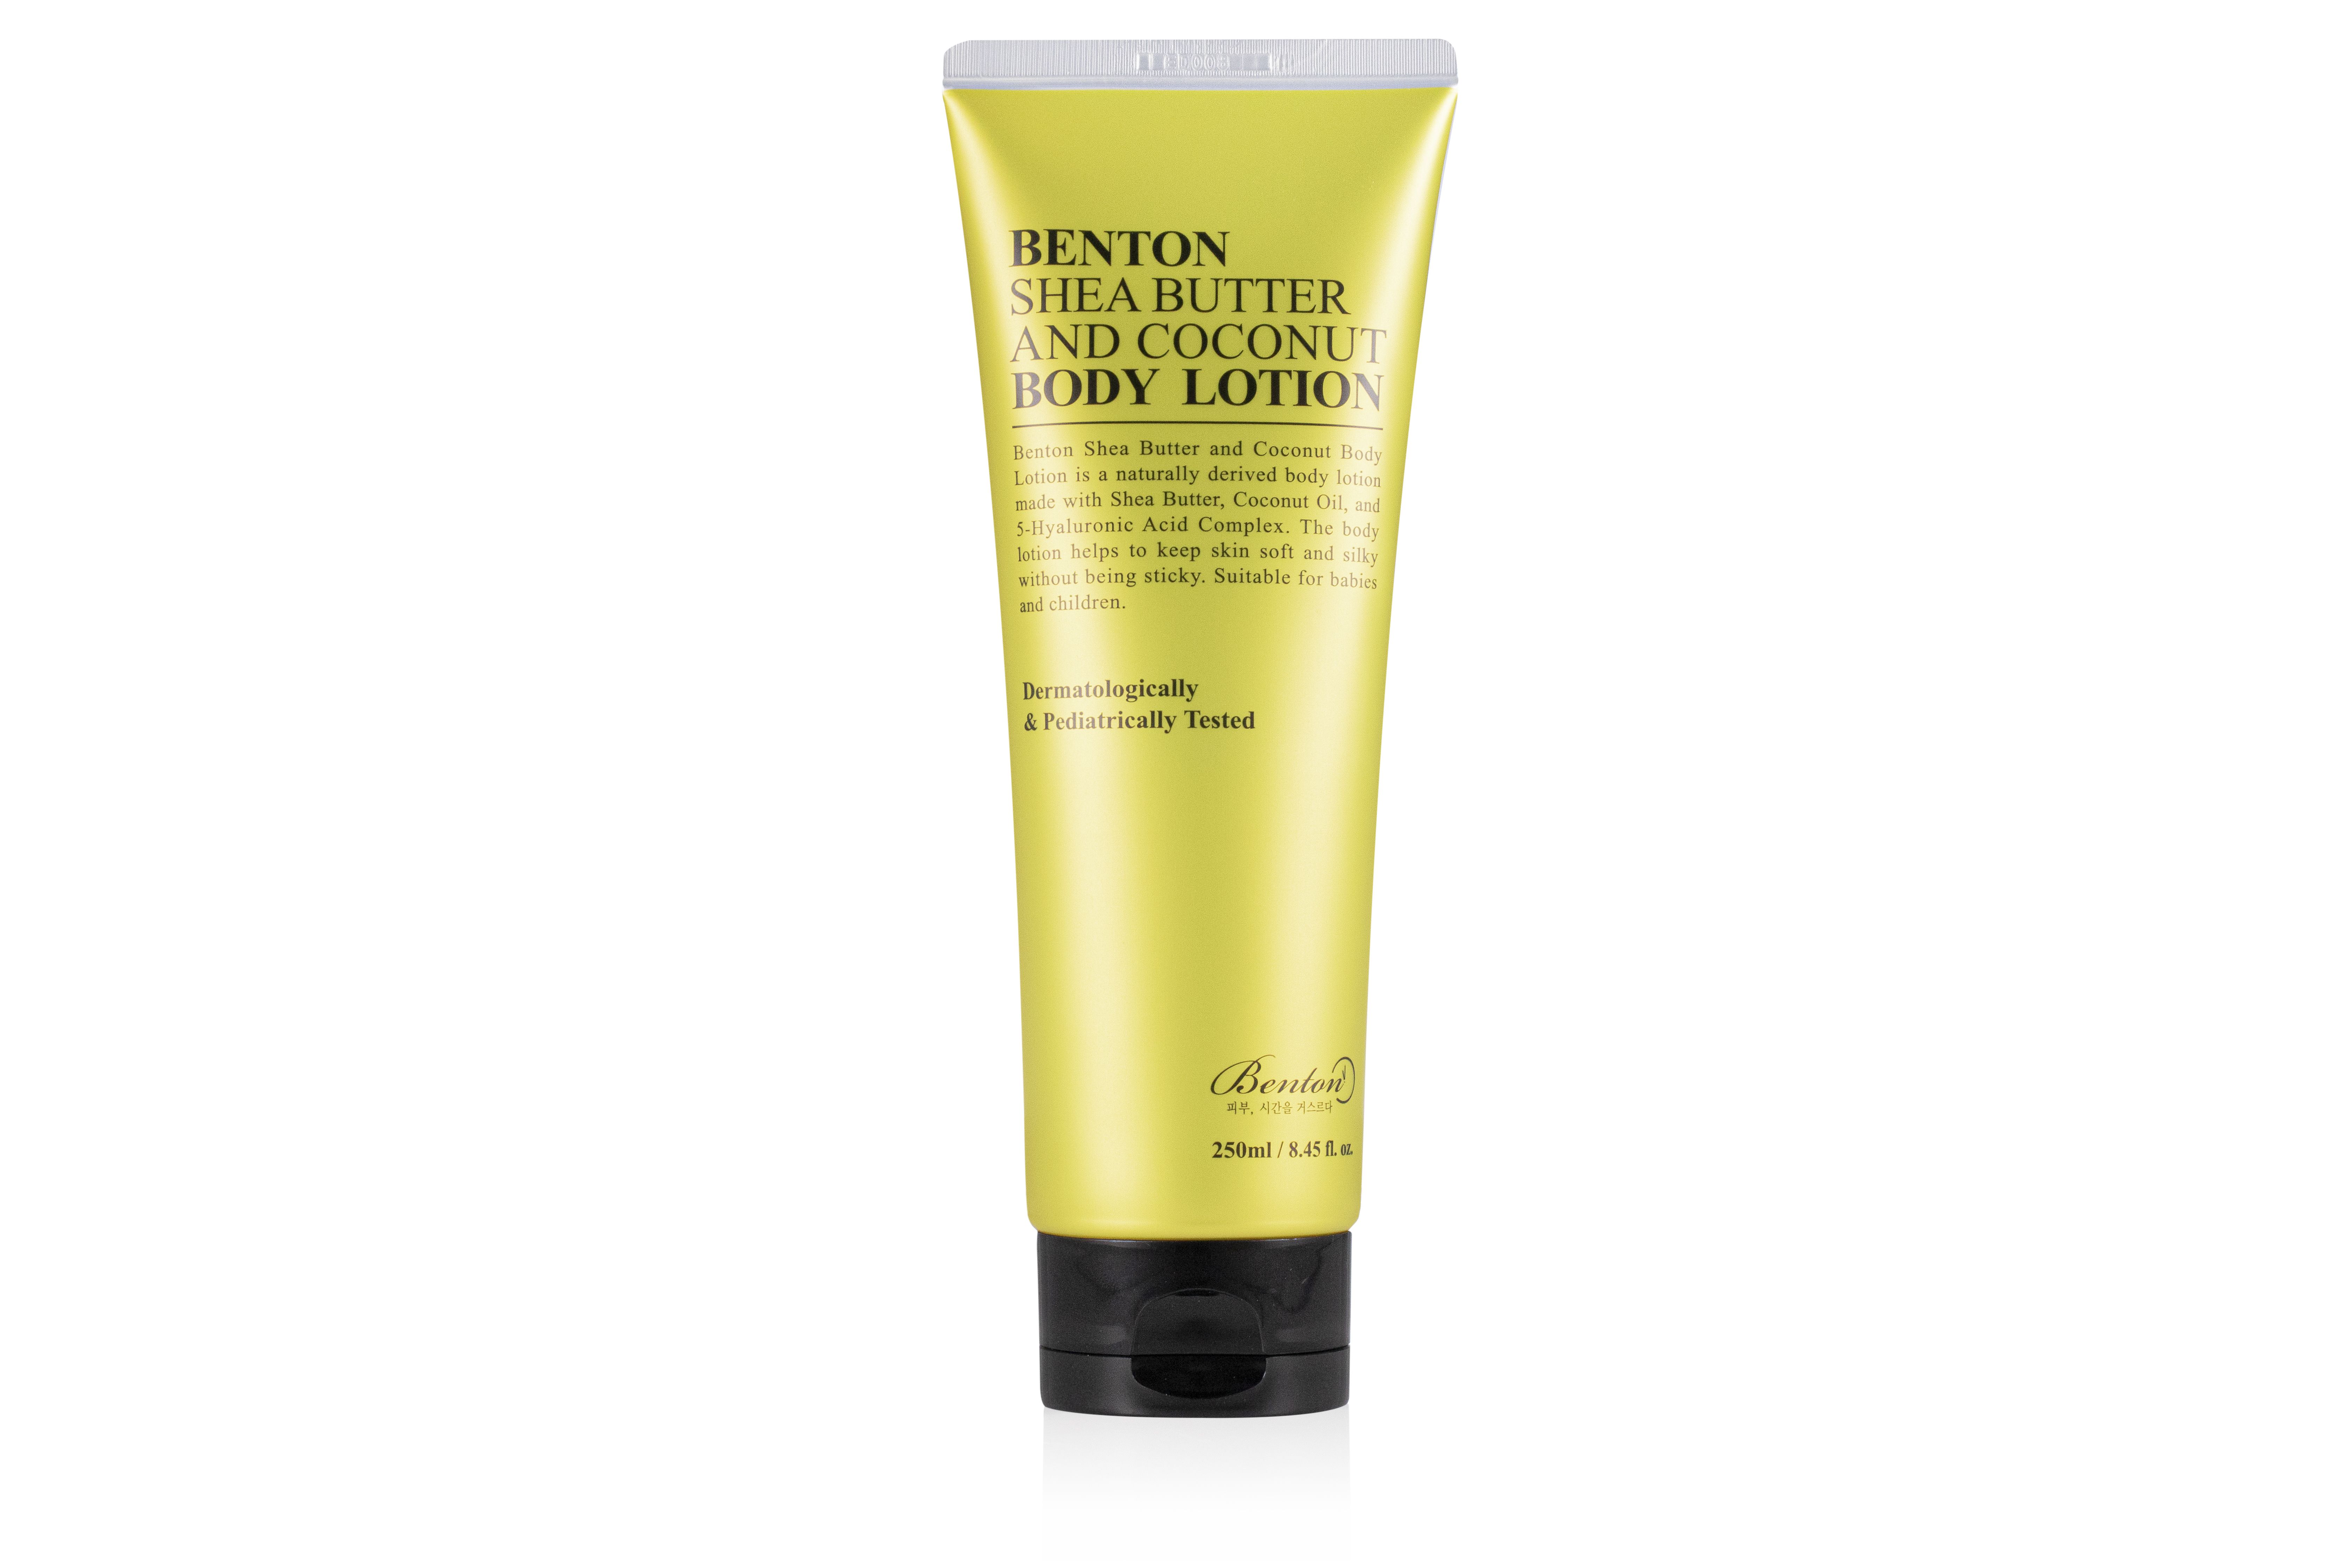 Benton Shea Butter And Coconut Body Lotion 250 ml